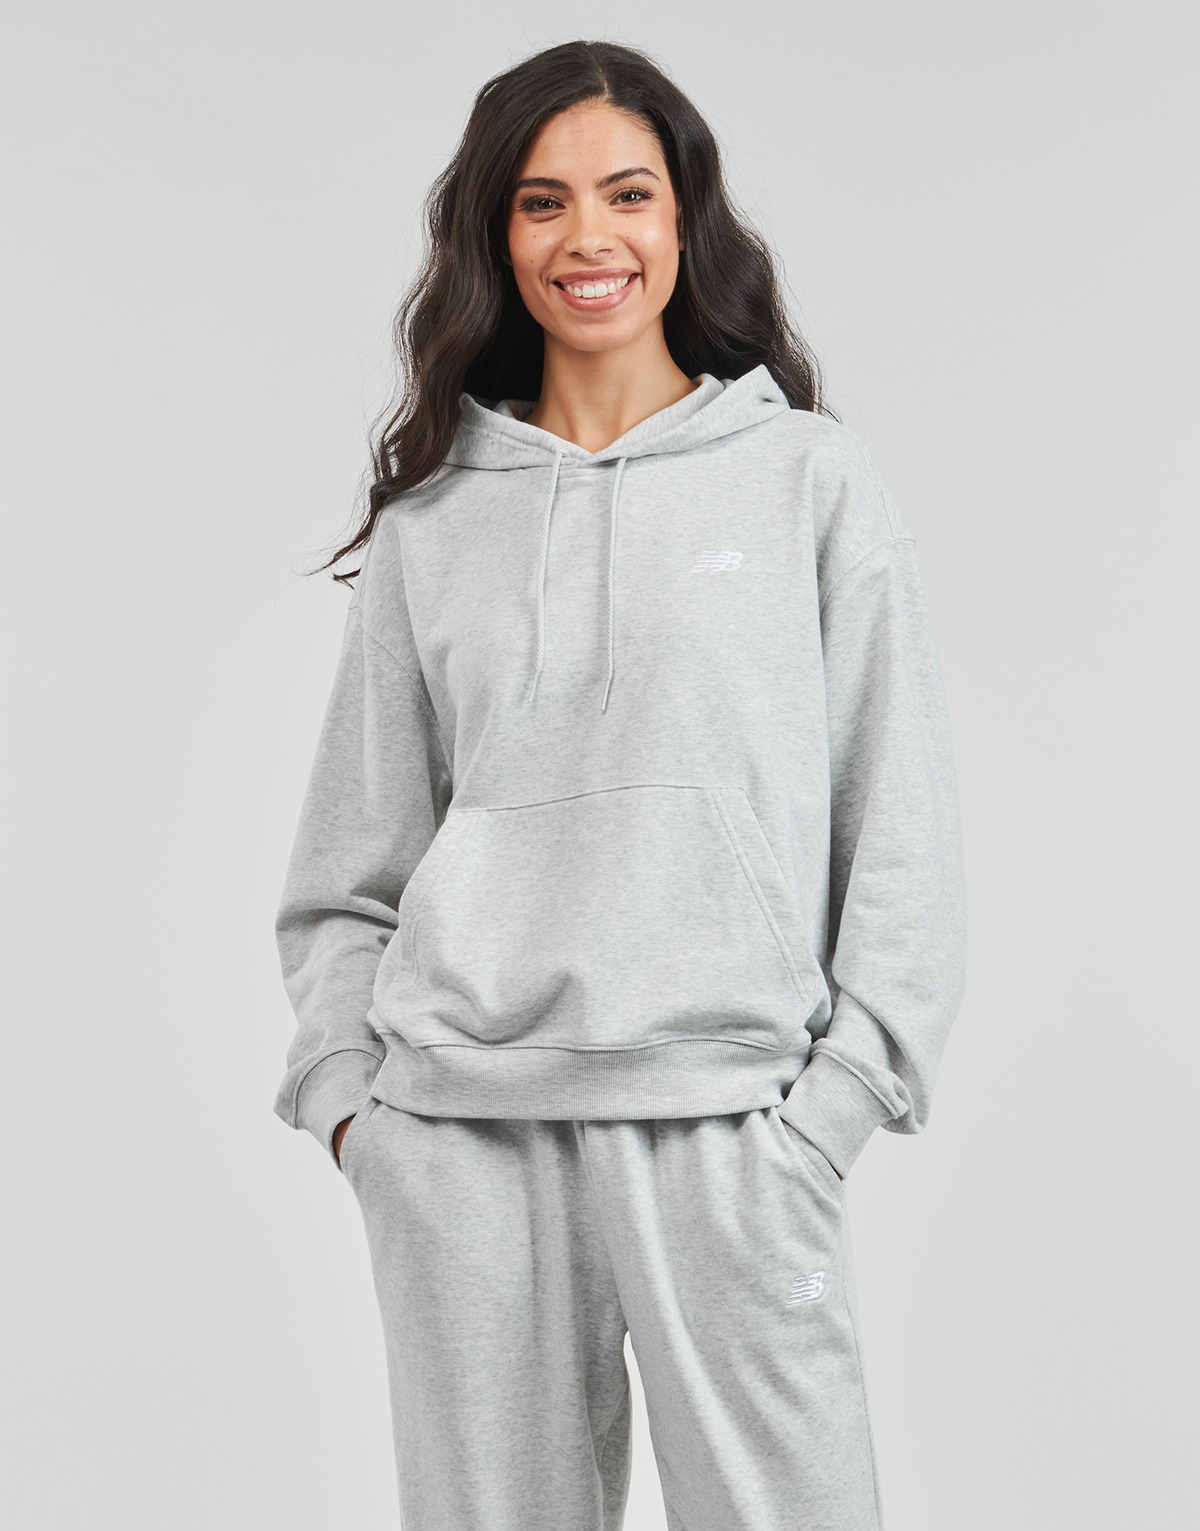 New Balance Gris FRENCH TERRY SMALL LOGO HOODIE ui3KBy6Z